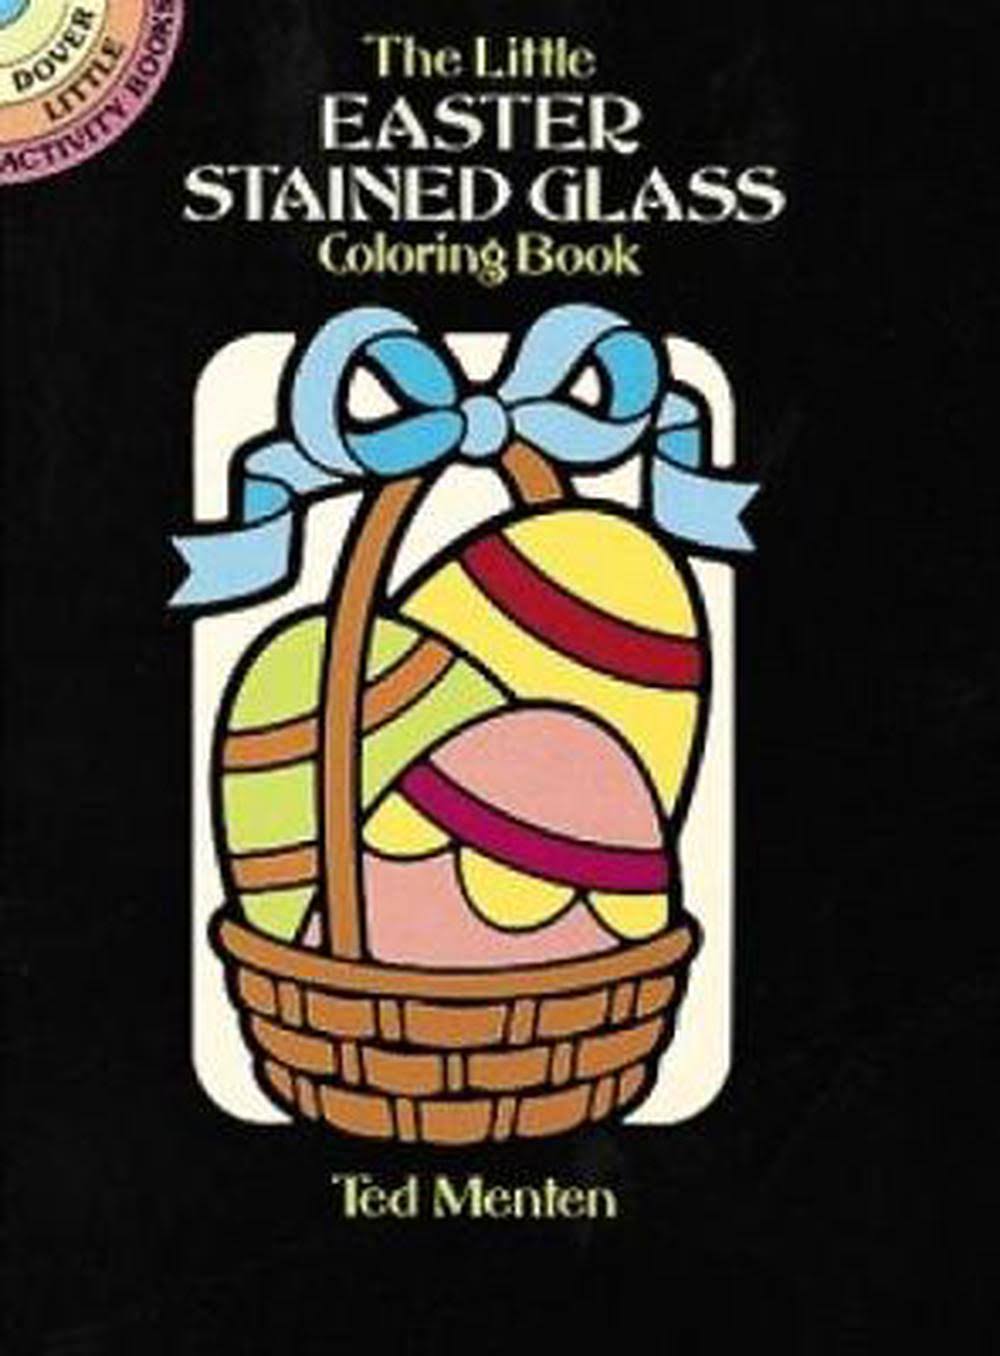 The Little Easter Stained Glass Coloring Book [Book]